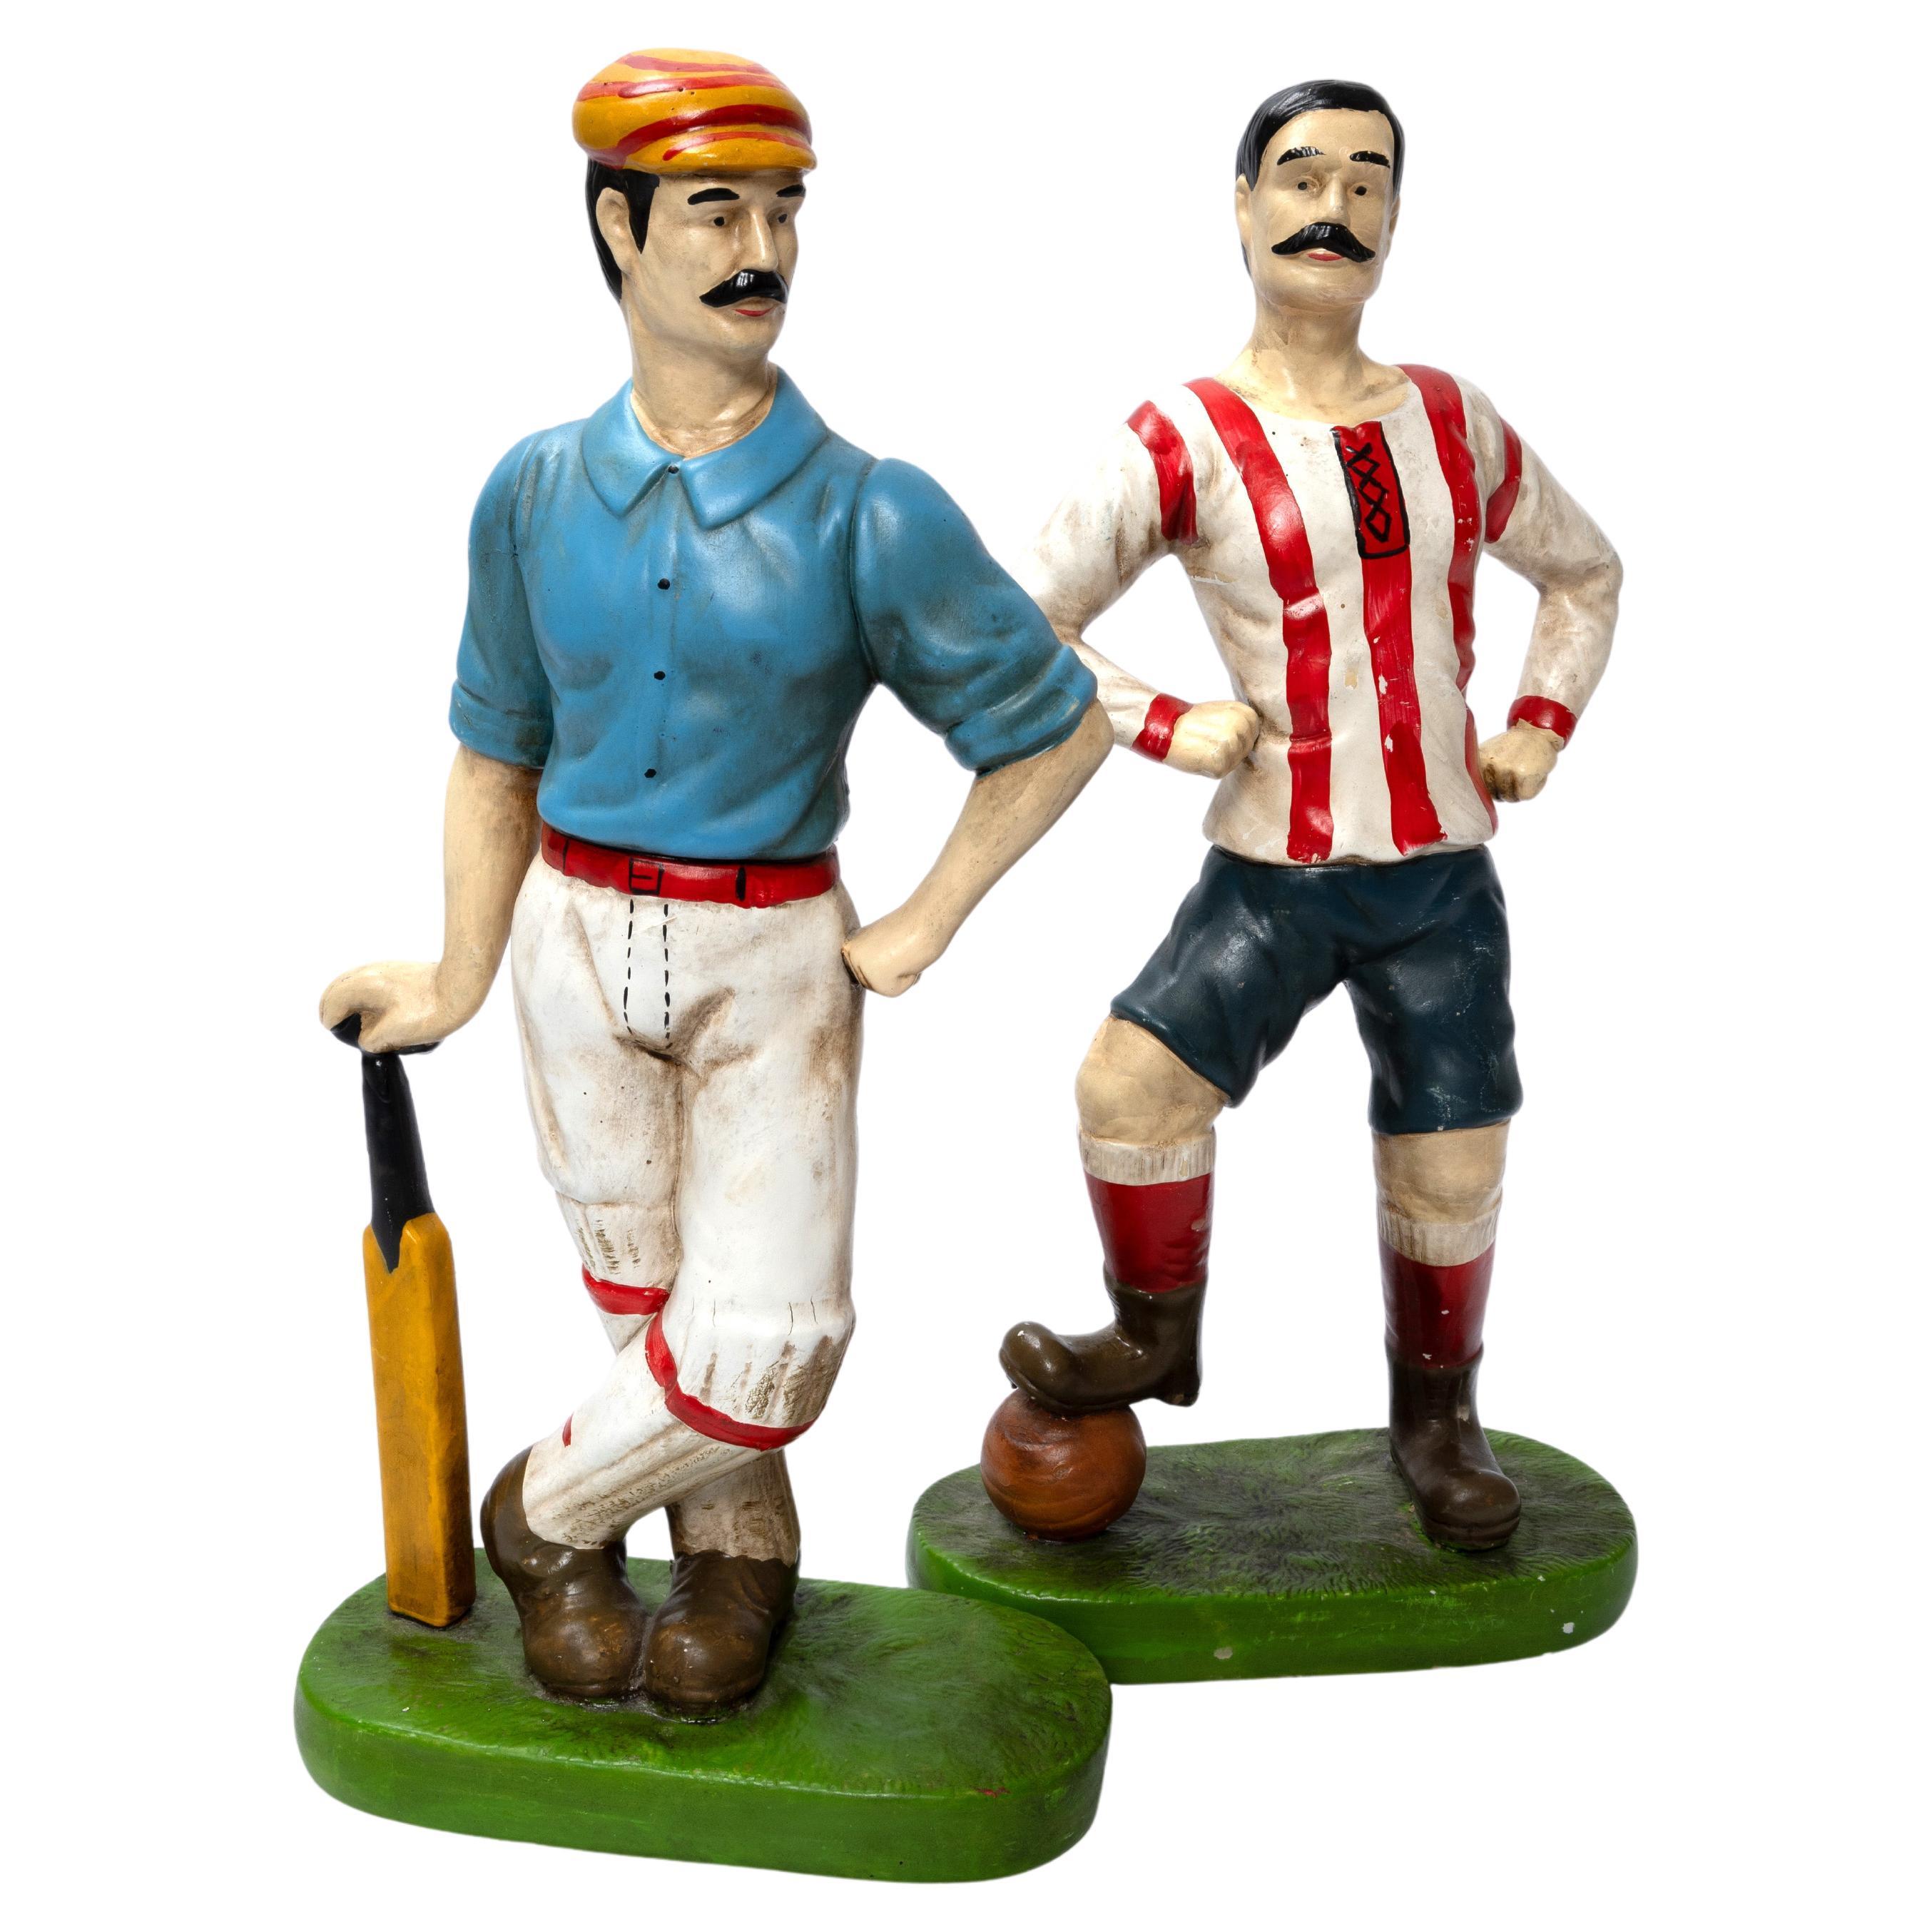 English Sporting Figures Of A Cricketer And A Footballer C.1920 For Sale